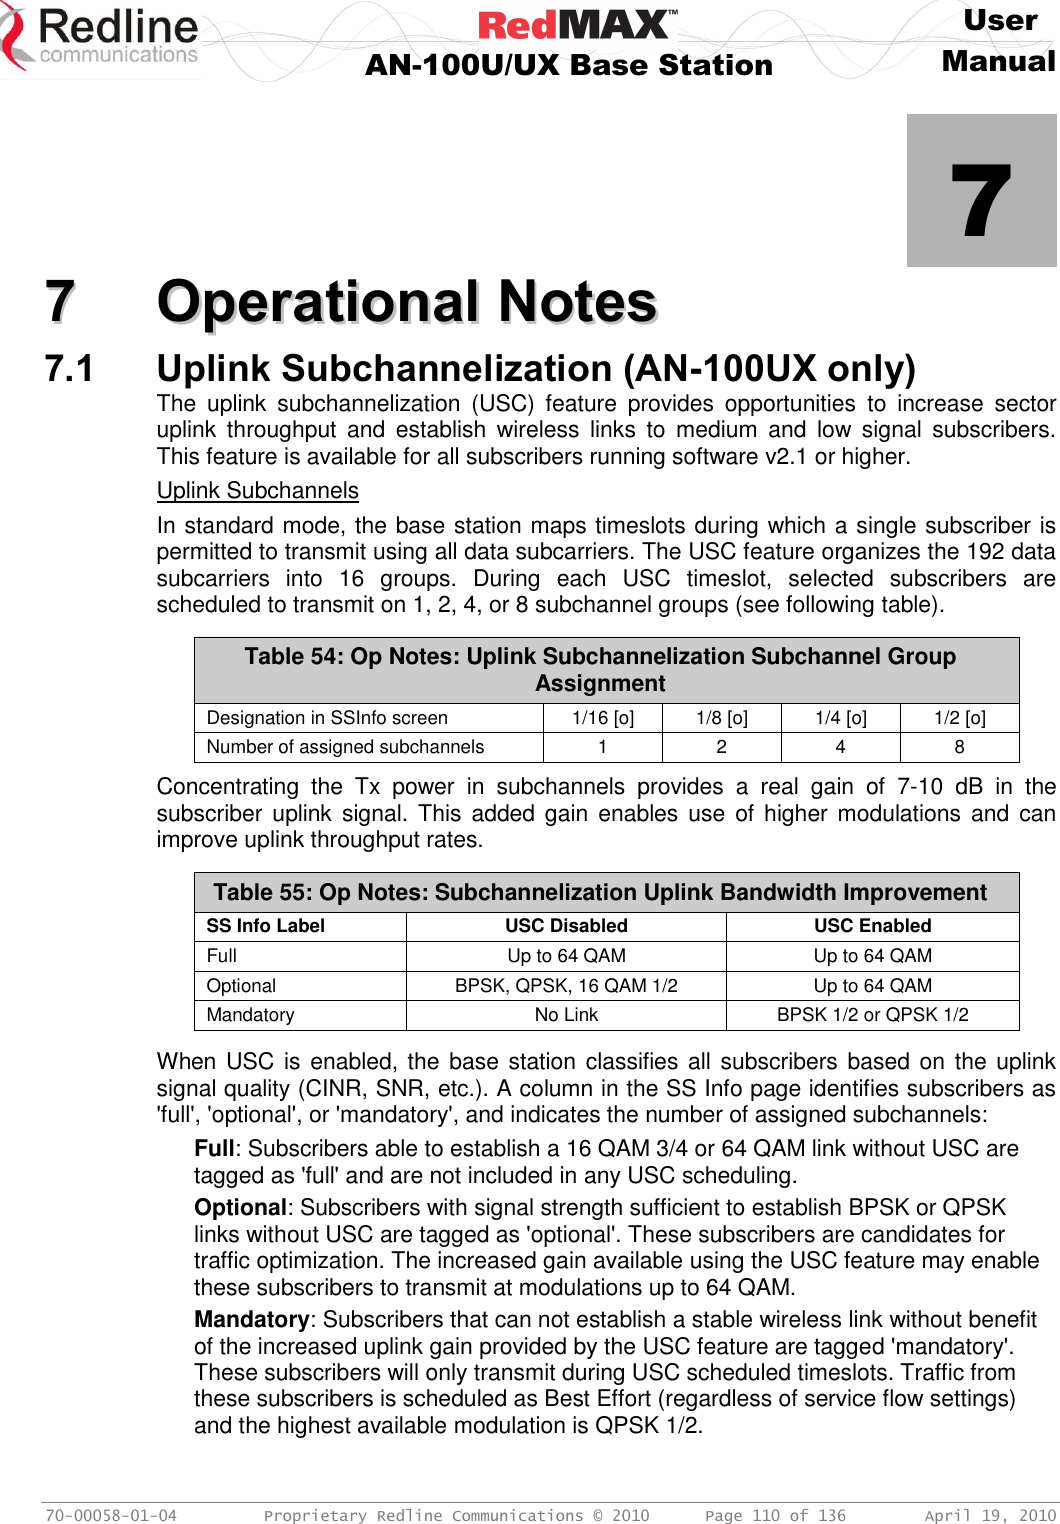     User  AN-100U/UX Base Station Manual   70-00058-01-04  Proprietary Redline Communications © 2010   Page 110 of 136  April 19, 2010            7 77  OOppeerraattiioonnaall  NNootteess  7.1 Uplink Subchannelization (AN-100UX only) The  uplink  subchannelization  (USC)  feature  provides  opportunities  to  increase  sector uplink  throughput  and  establish  wireless  links  to  medium  and  low  signal  subscribers. This feature is available for all subscribers running software v2.1 or higher. Uplink Subchannels In standard mode, the base station maps timeslots during which a single subscriber is permitted to transmit using all data subcarriers. The USC feature organizes the 192 data subcarriers  into  16  groups.  During  each  USC  timeslot,  selected  subscribers  are scheduled to transmit on 1, 2, 4, or 8 subchannel groups (see following table).   Table 54: Op Notes: Uplink Subchannelization Subchannel Group Assignment Designation in SSInfo screen 1/16 [o] 1/8 [o] 1/4 [o] 1/2 [o] Number of assigned subchannels  1 2 4 8  Concentrating  the  Tx  power  in  subchannels  provides  a  real  gain  of  7-10  dB  in  the subscriber uplink  signal. This  added gain enables use  of  higher modulations and  can improve uplink throughput rates.  Table 55: Op Notes: Subchannelization Uplink Bandwidth Improvement SS Info Label USC Disabled USC Enabled Full Up to 64 QAM Up to 64 QAM Optional BPSK, QPSK, 16 QAM 1/2 Up to 64 QAM Mandatory No Link BPSK 1/2 or QPSK 1/2  When USC is enabled, the base station classifies all subscribers based on the uplink signal quality (CINR, SNR, etc.). A column in the SS Info page identifies subscribers as &apos;full&apos;, &apos;optional&apos;, or &apos;mandatory&apos;, and indicates the number of assigned subchannels: Full: Subscribers able to establish a 16 QAM 3/4 or 64 QAM link without USC are tagged as &apos;full&apos; and are not included in any USC scheduling. Optional: Subscribers with signal strength sufficient to establish BPSK or QPSK links without USC are tagged as &apos;optional&apos;. These subscribers are candidates for traffic optimization. The increased gain available using the USC feature may enable these subscribers to transmit at modulations up to 64 QAM. Mandatory: Subscribers that can not establish a stable wireless link without benefit of the increased uplink gain provided by the USC feature are tagged &apos;mandatory&apos;. These subscribers will only transmit during USC scheduled timeslots. Traffic from these subscribers is scheduled as Best Effort (regardless of service flow settings) and the highest available modulation is QPSK 1/2. 